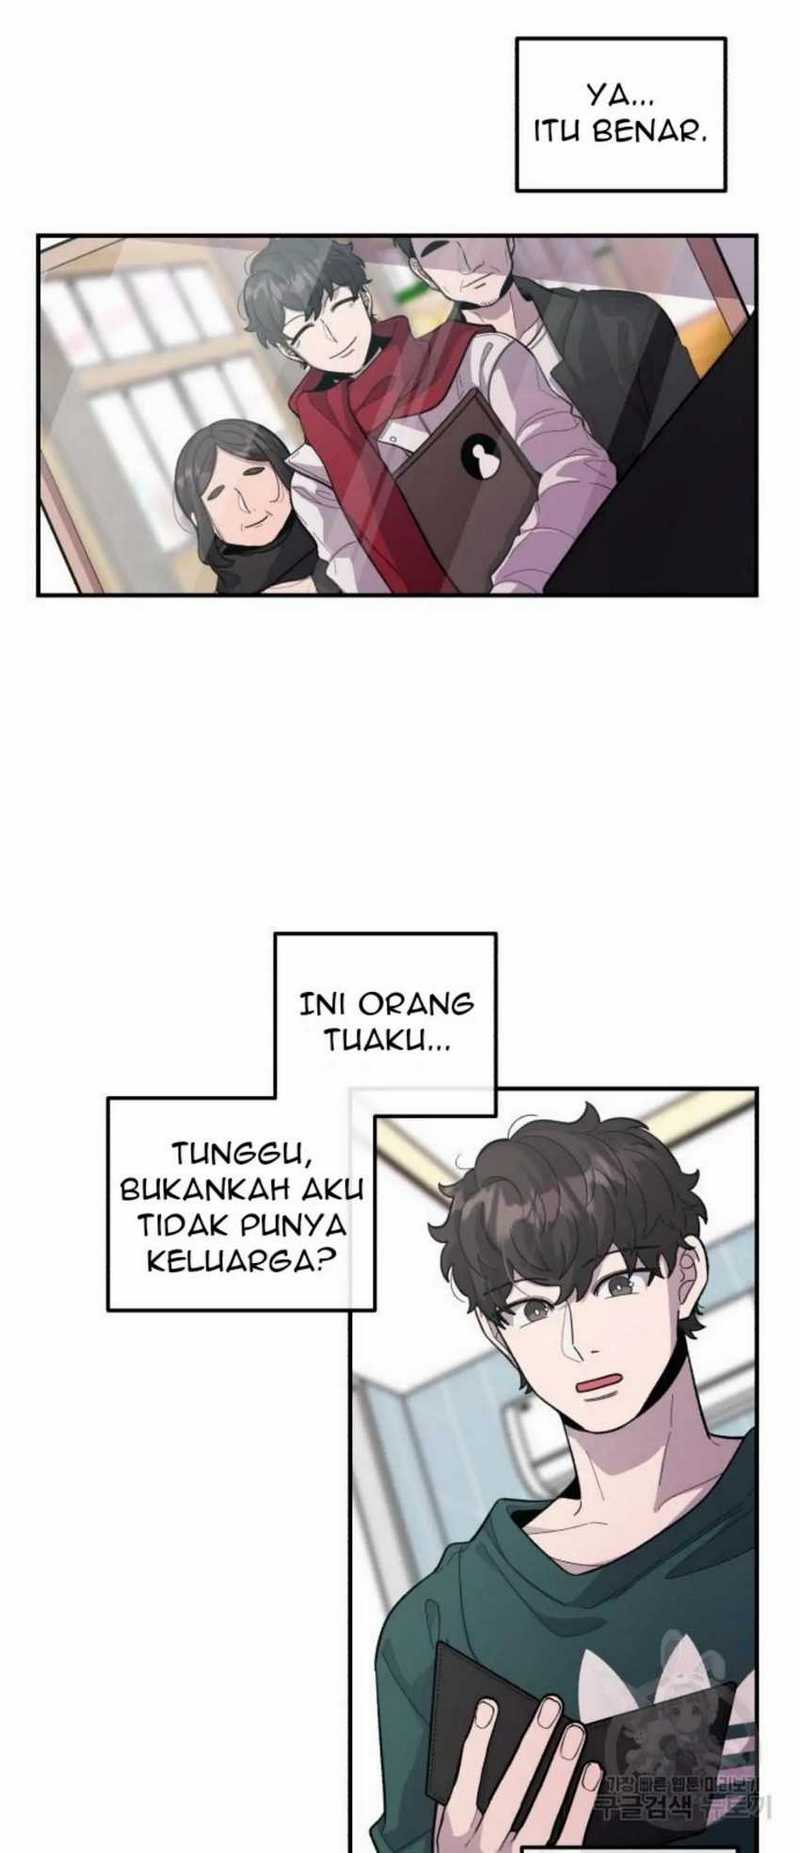 Musician Genius Who Lives Twice Chapter 01